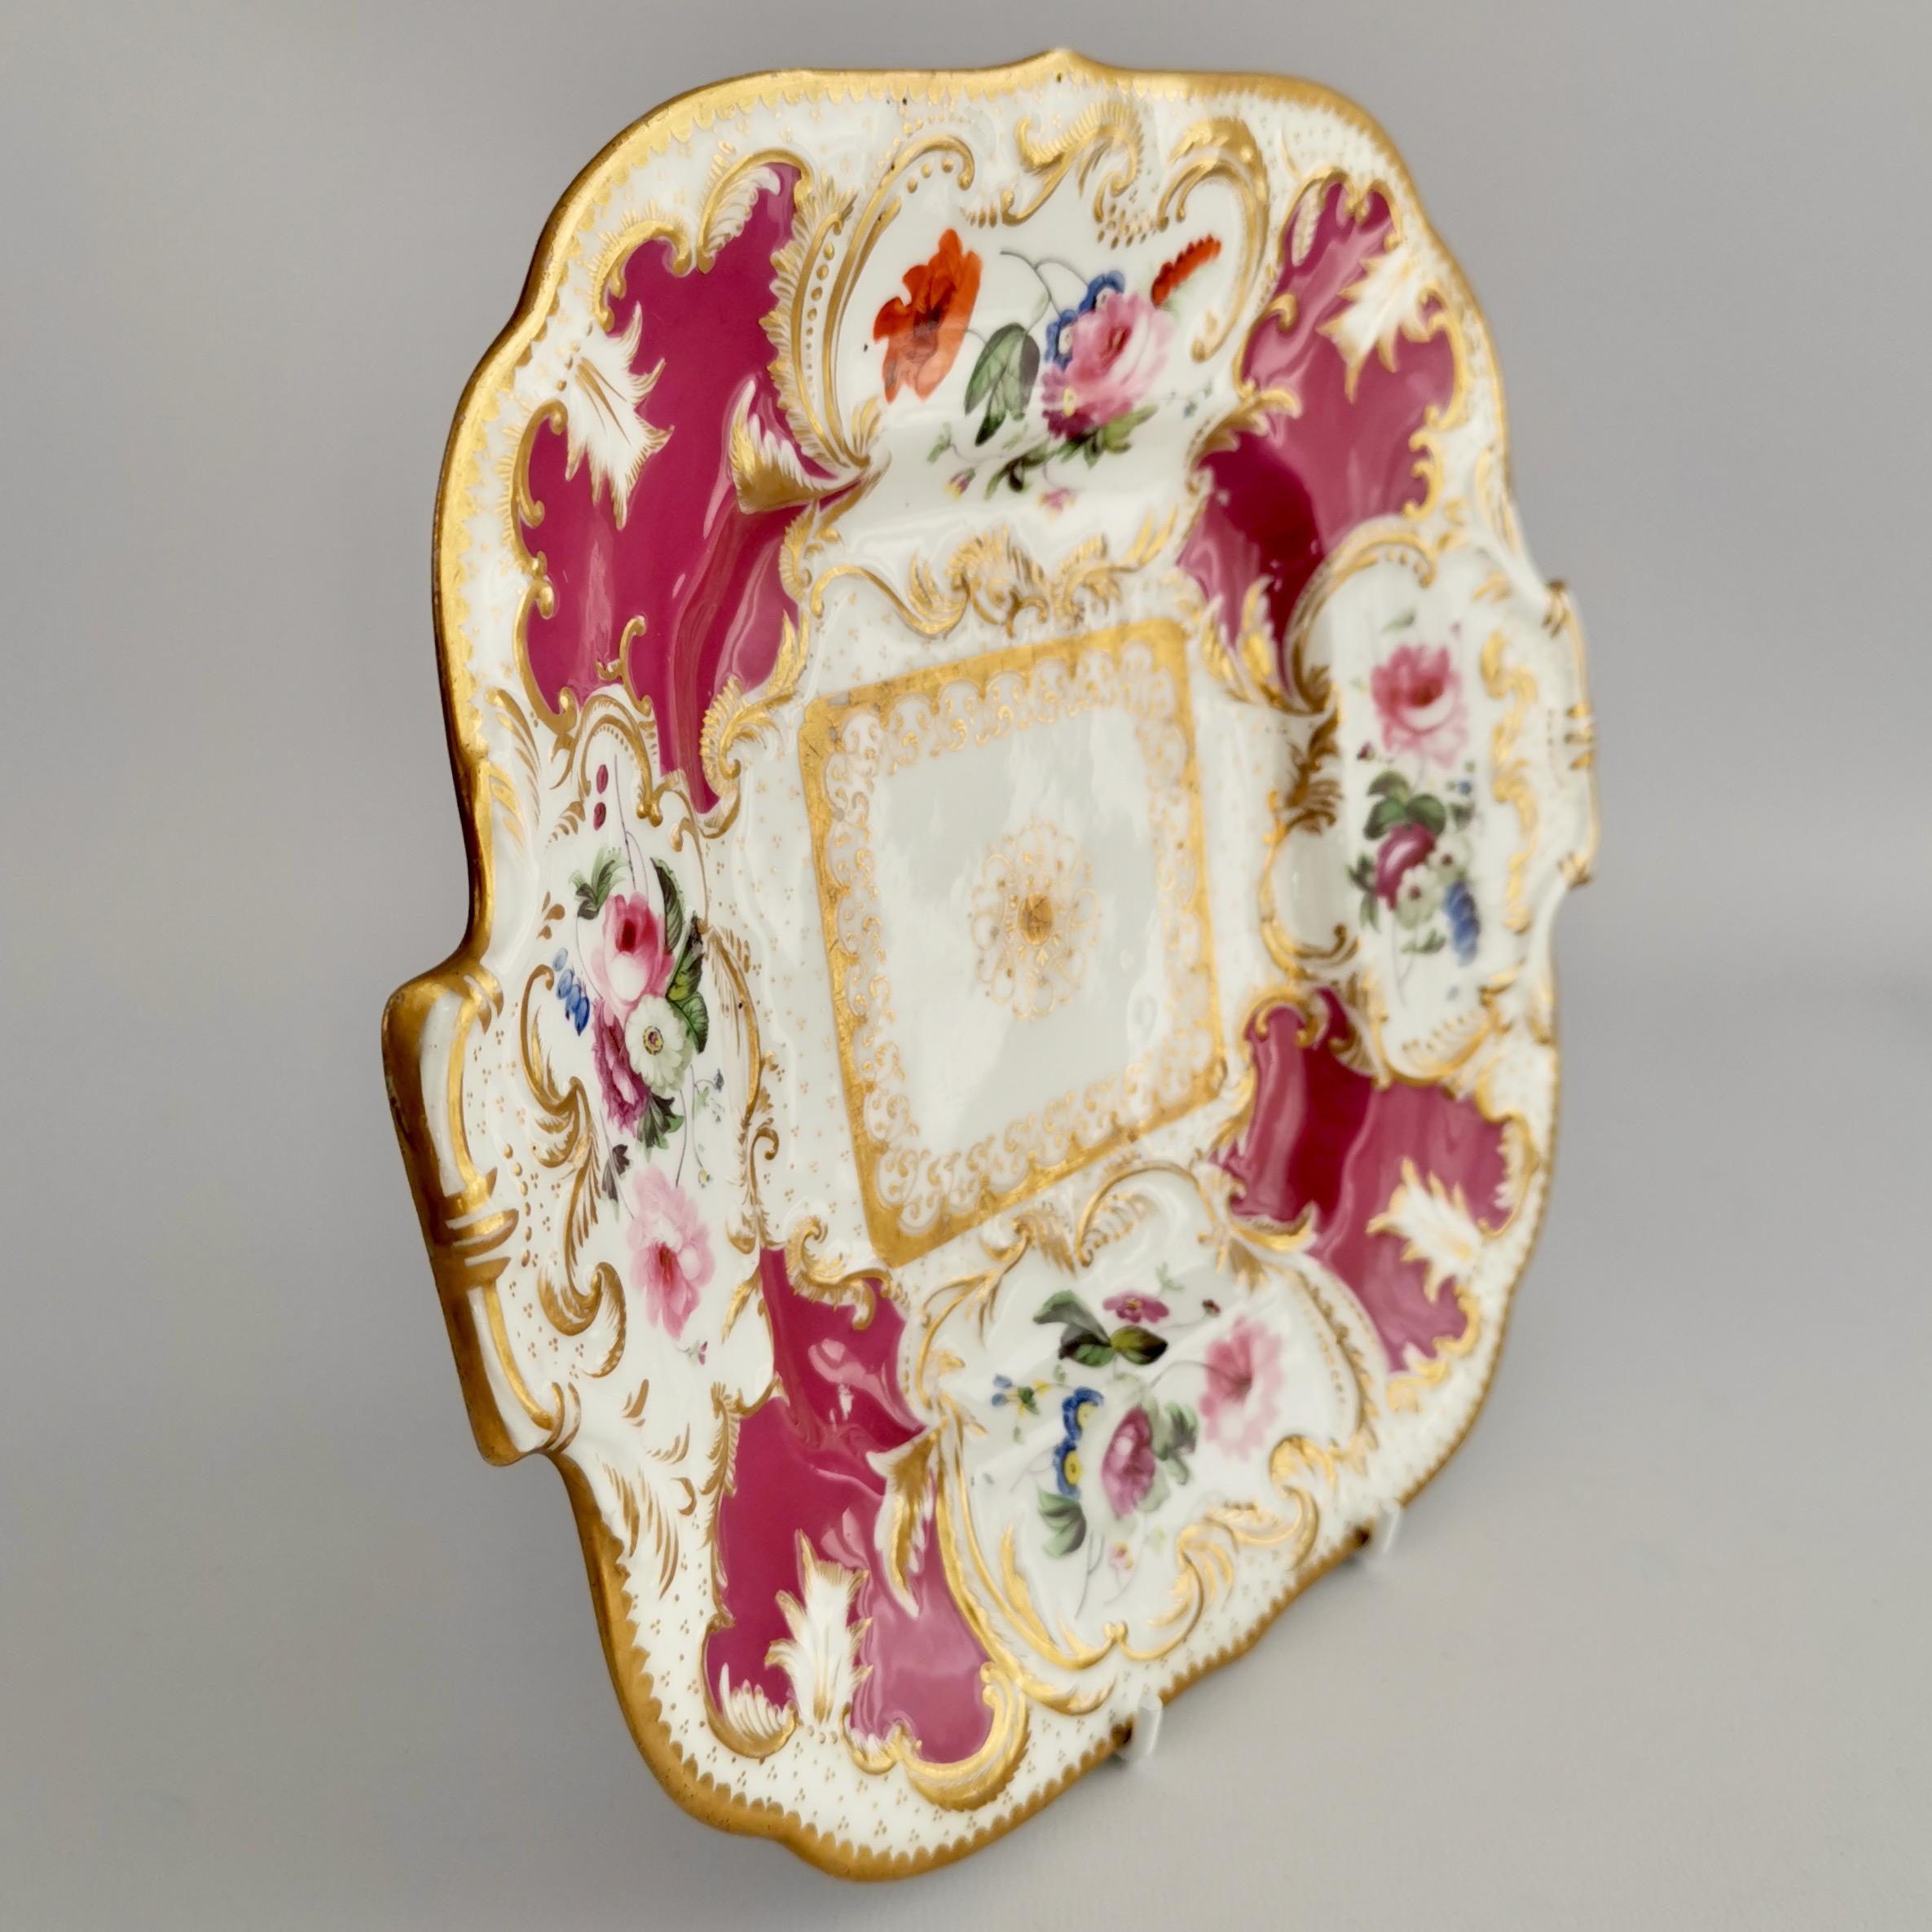 Minton Porcelain Cake Plate, Maroon with Flowers, Rococo Revival, ca 1830 6